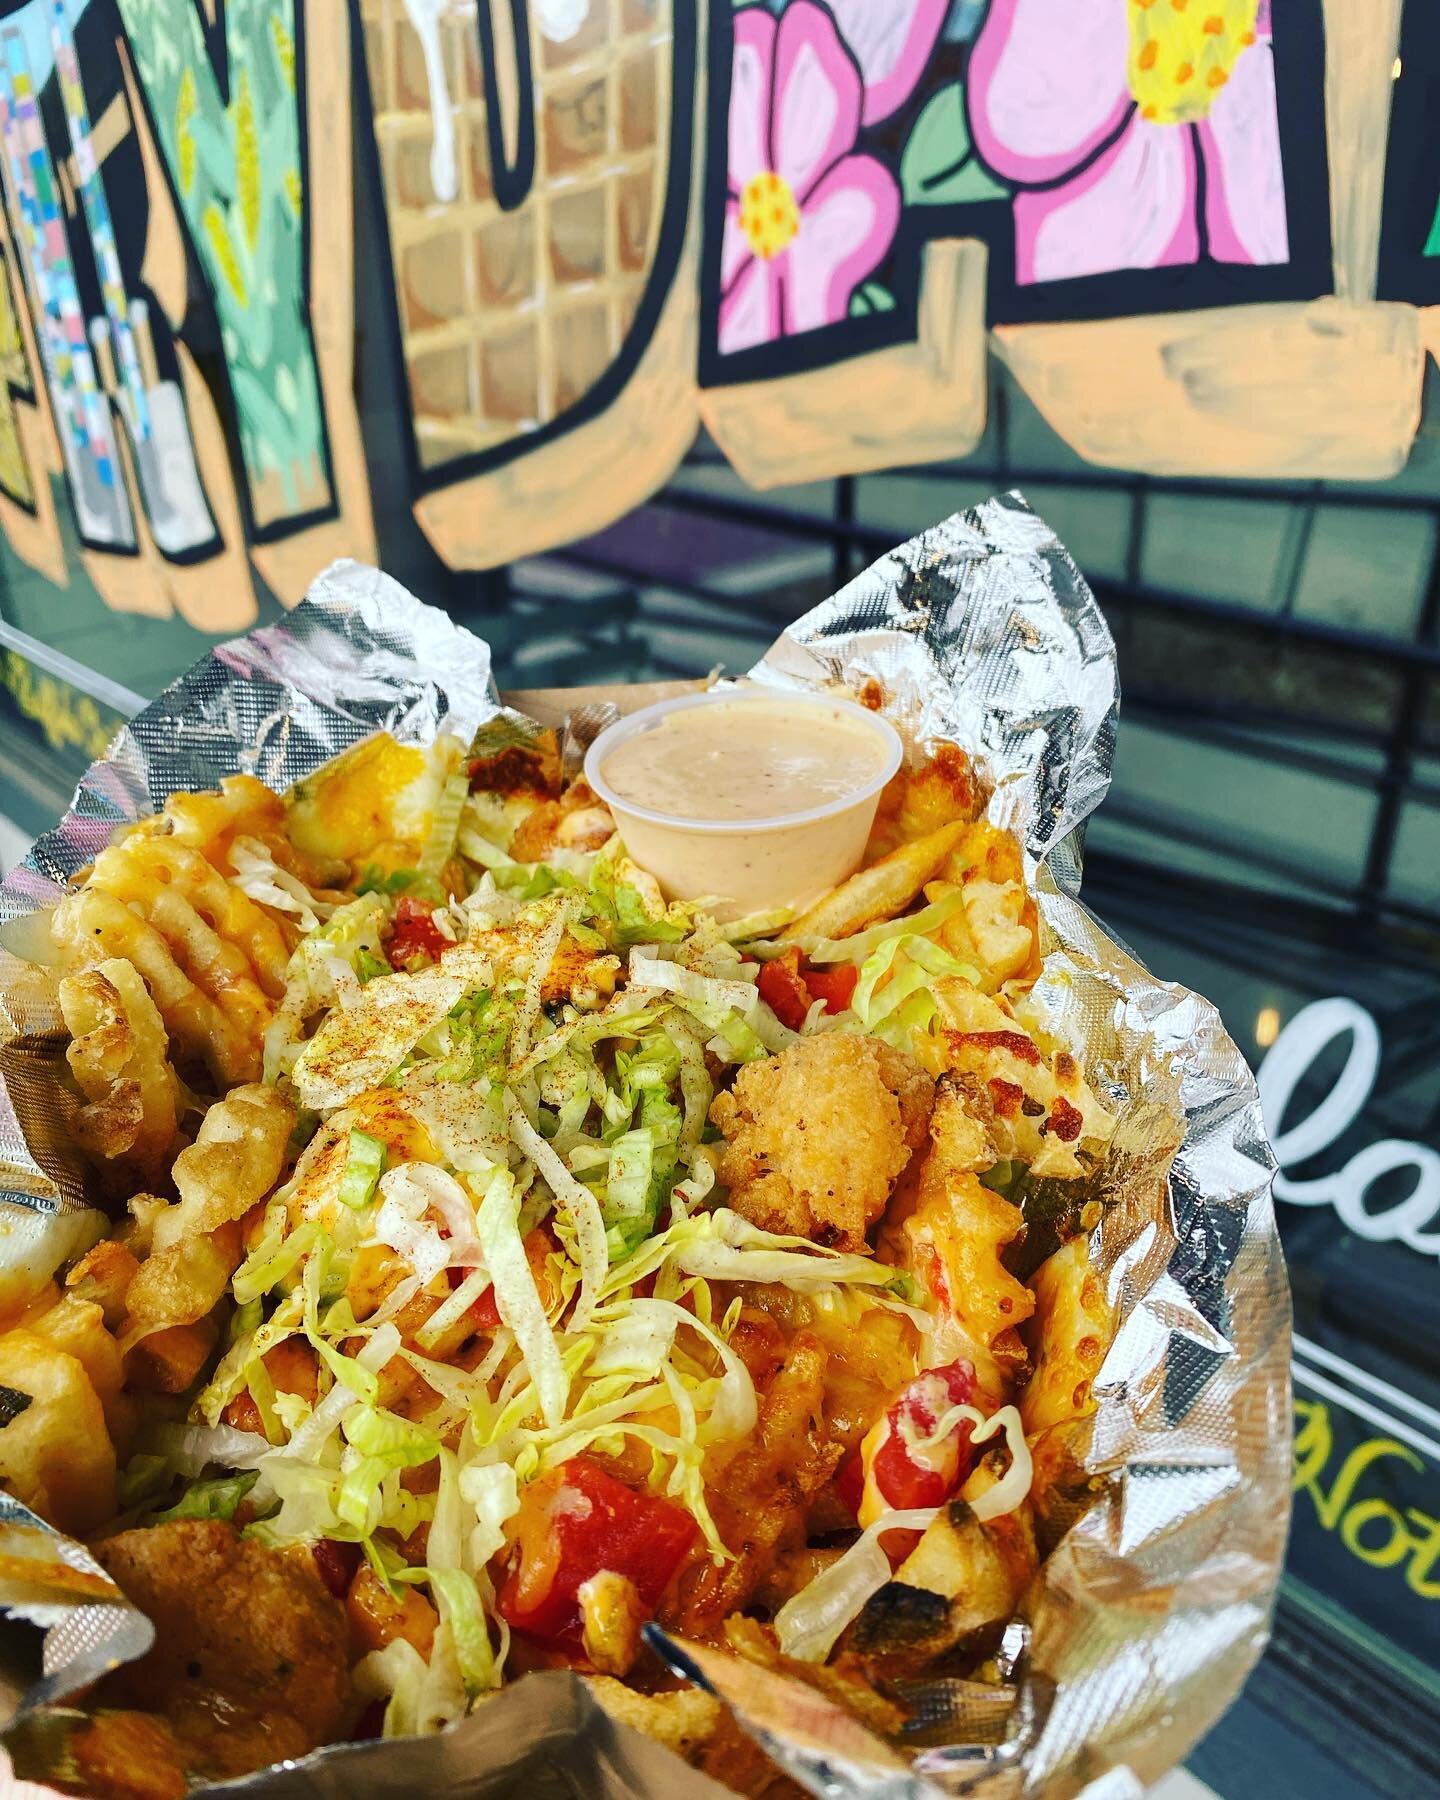 🎶 I&rsquo;m just a ✨Po&rsquo; Boy✨ nobody love me 🎶 

🍤Cajun Shrimp Po&rsquo; Boy Fries🍤
Yum.
Crispity-crunchity fries, crispy shrimp, Cajun remoulade sauce, Colby-Jack, Cajun seasoning, Cajun stewed tomatoes, and shredded lettuce ( for the color